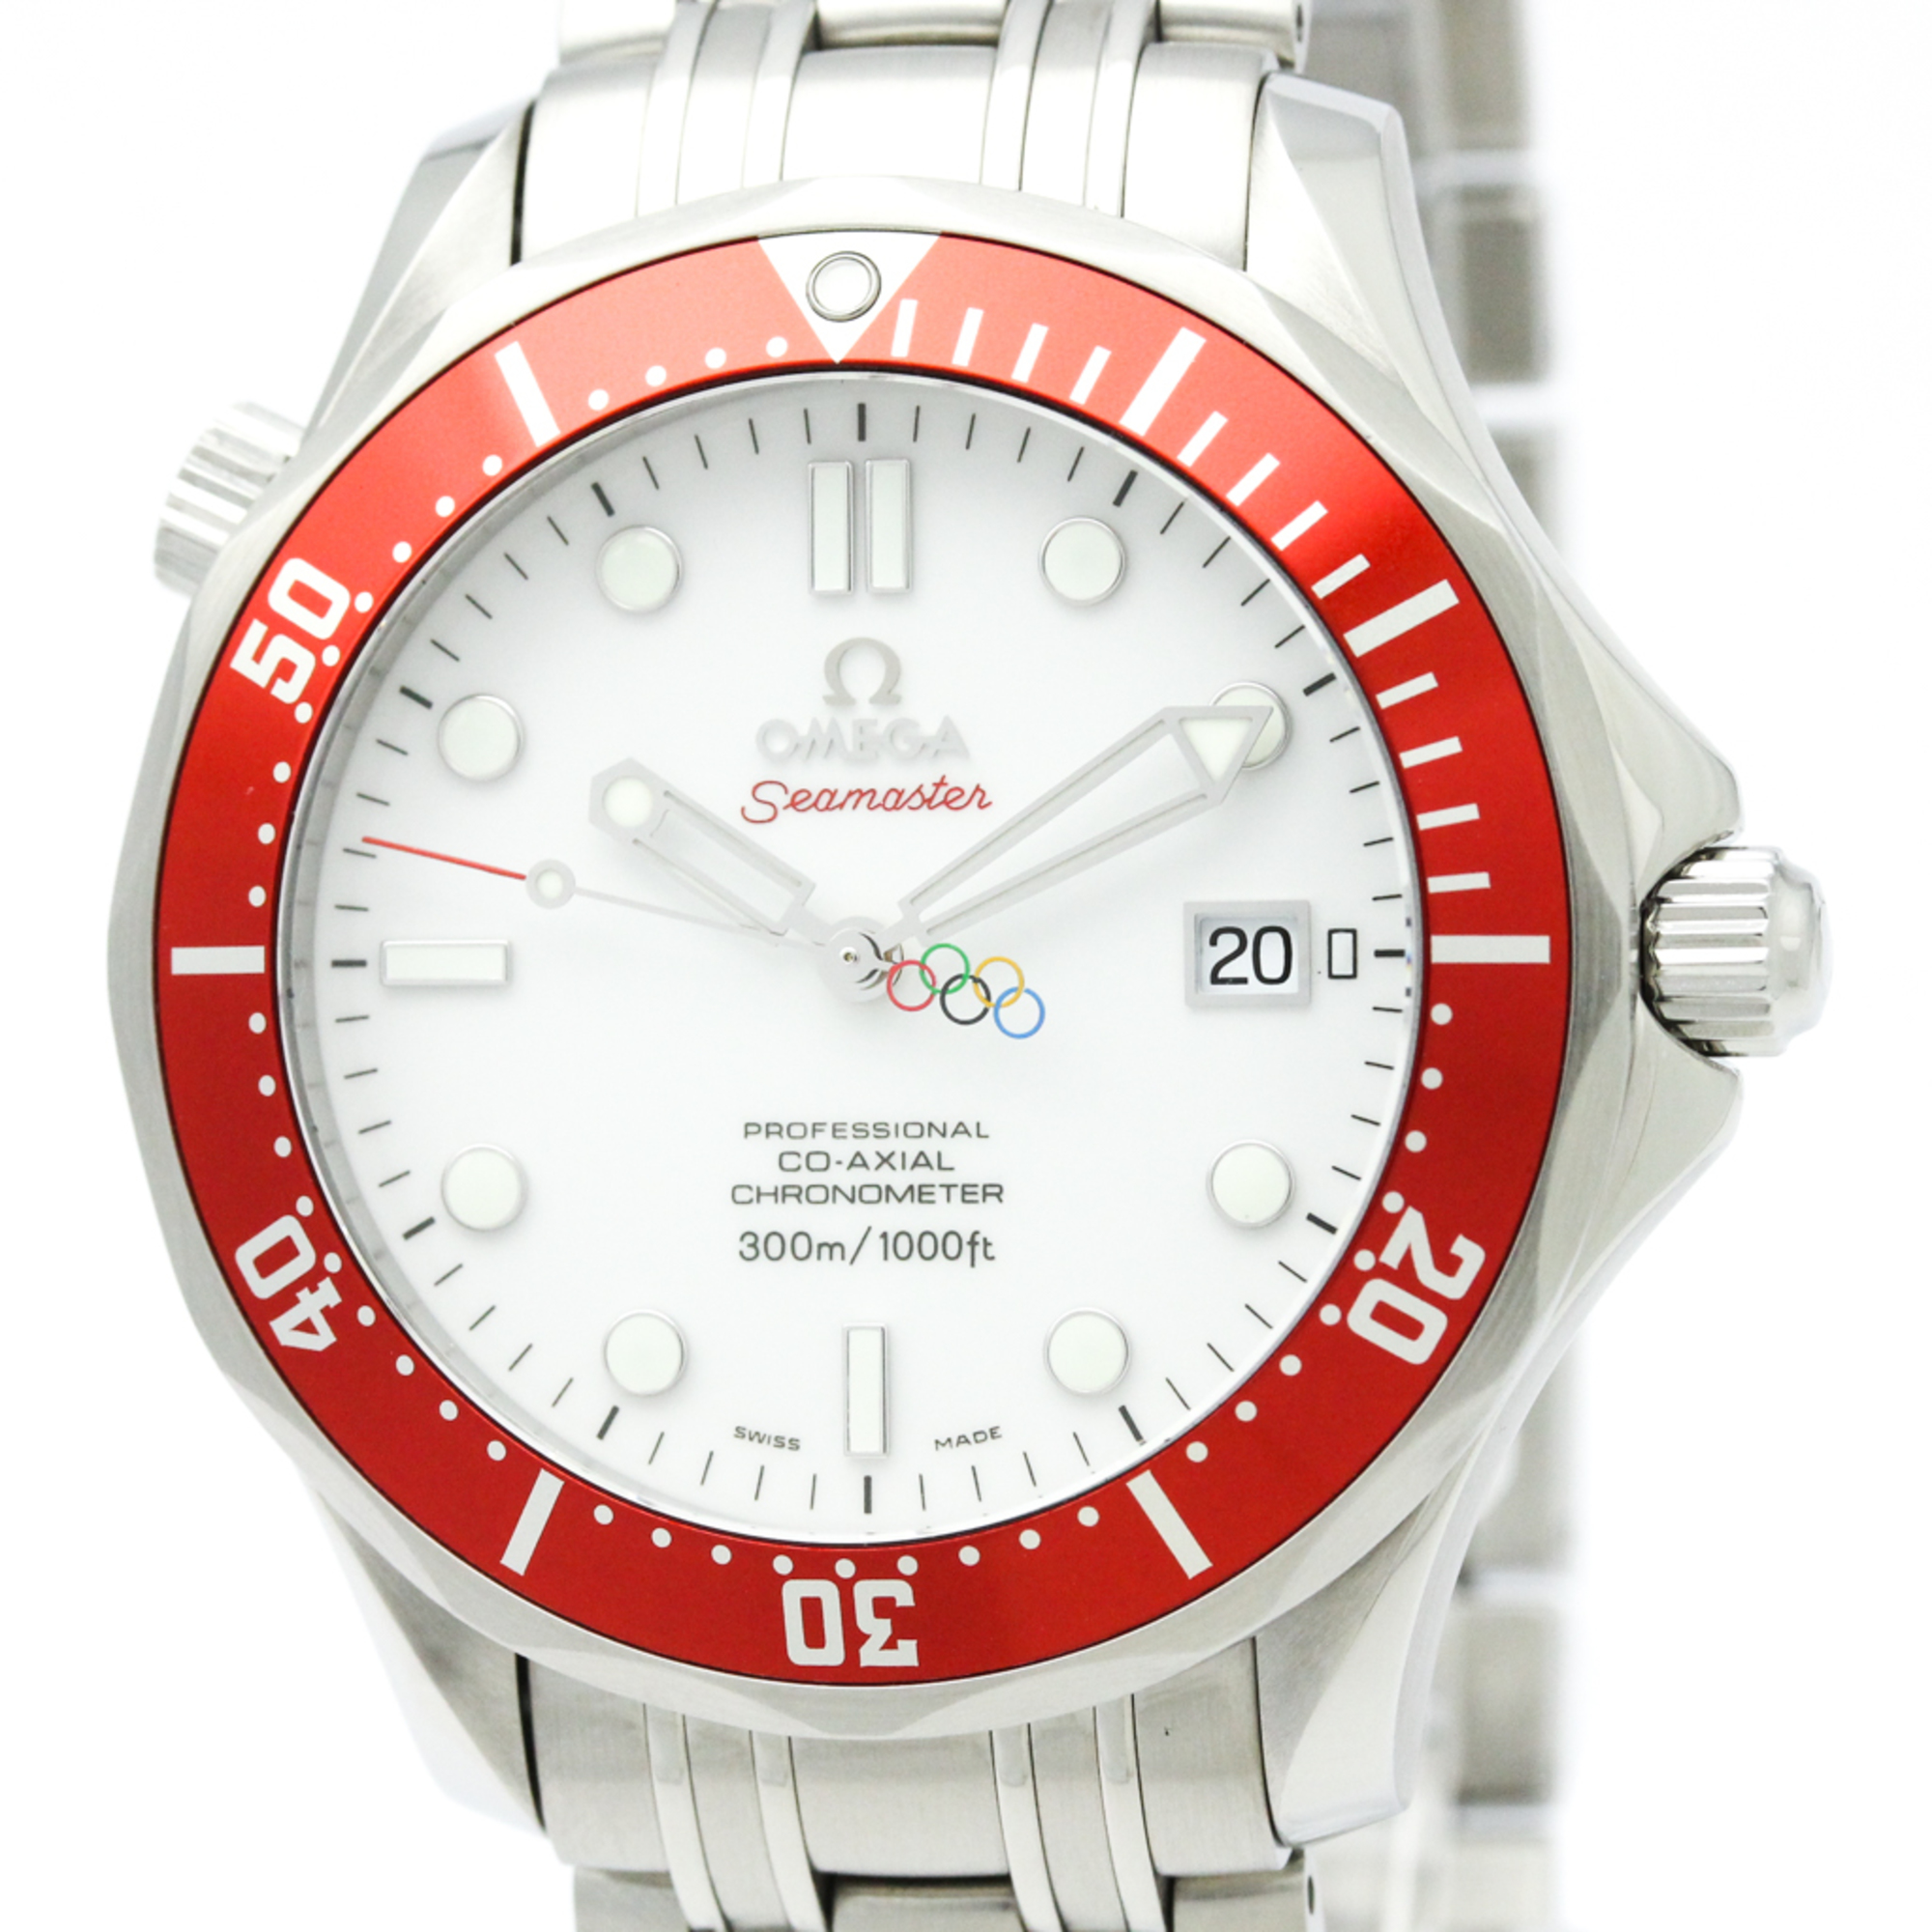 Omega Seamaster Automatic Stainless Steel Men's Sports Watch 212.30.41.20.04.001